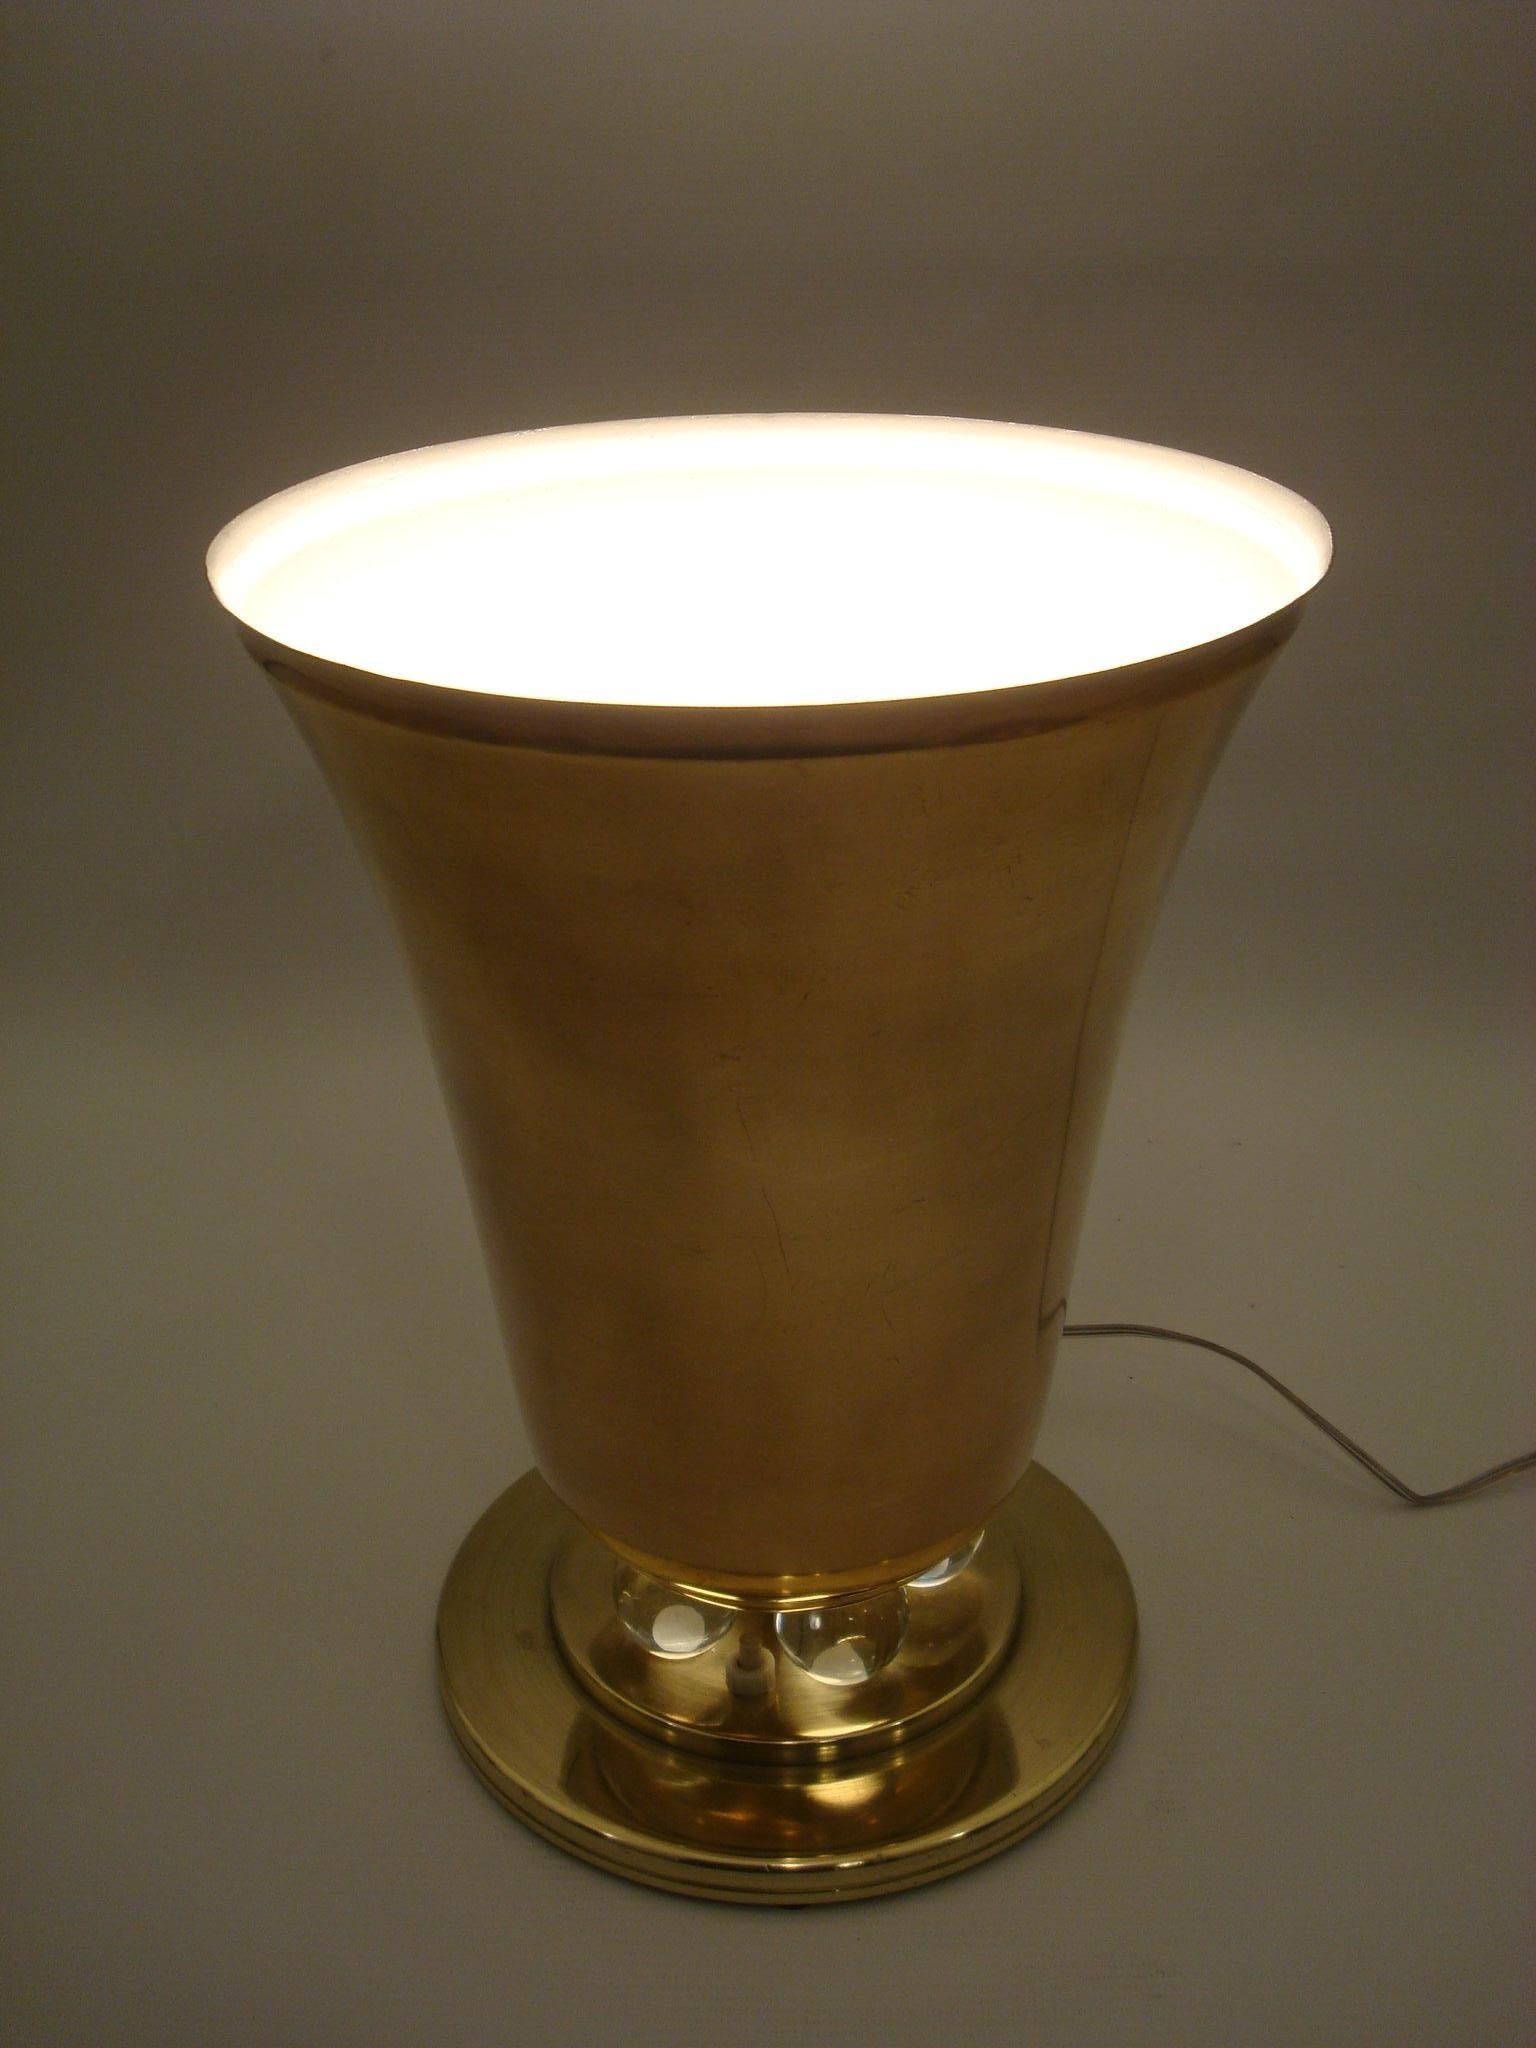 Art Deco Uplight Brass Metal Table Lamp, French, 1930s For Sale 4